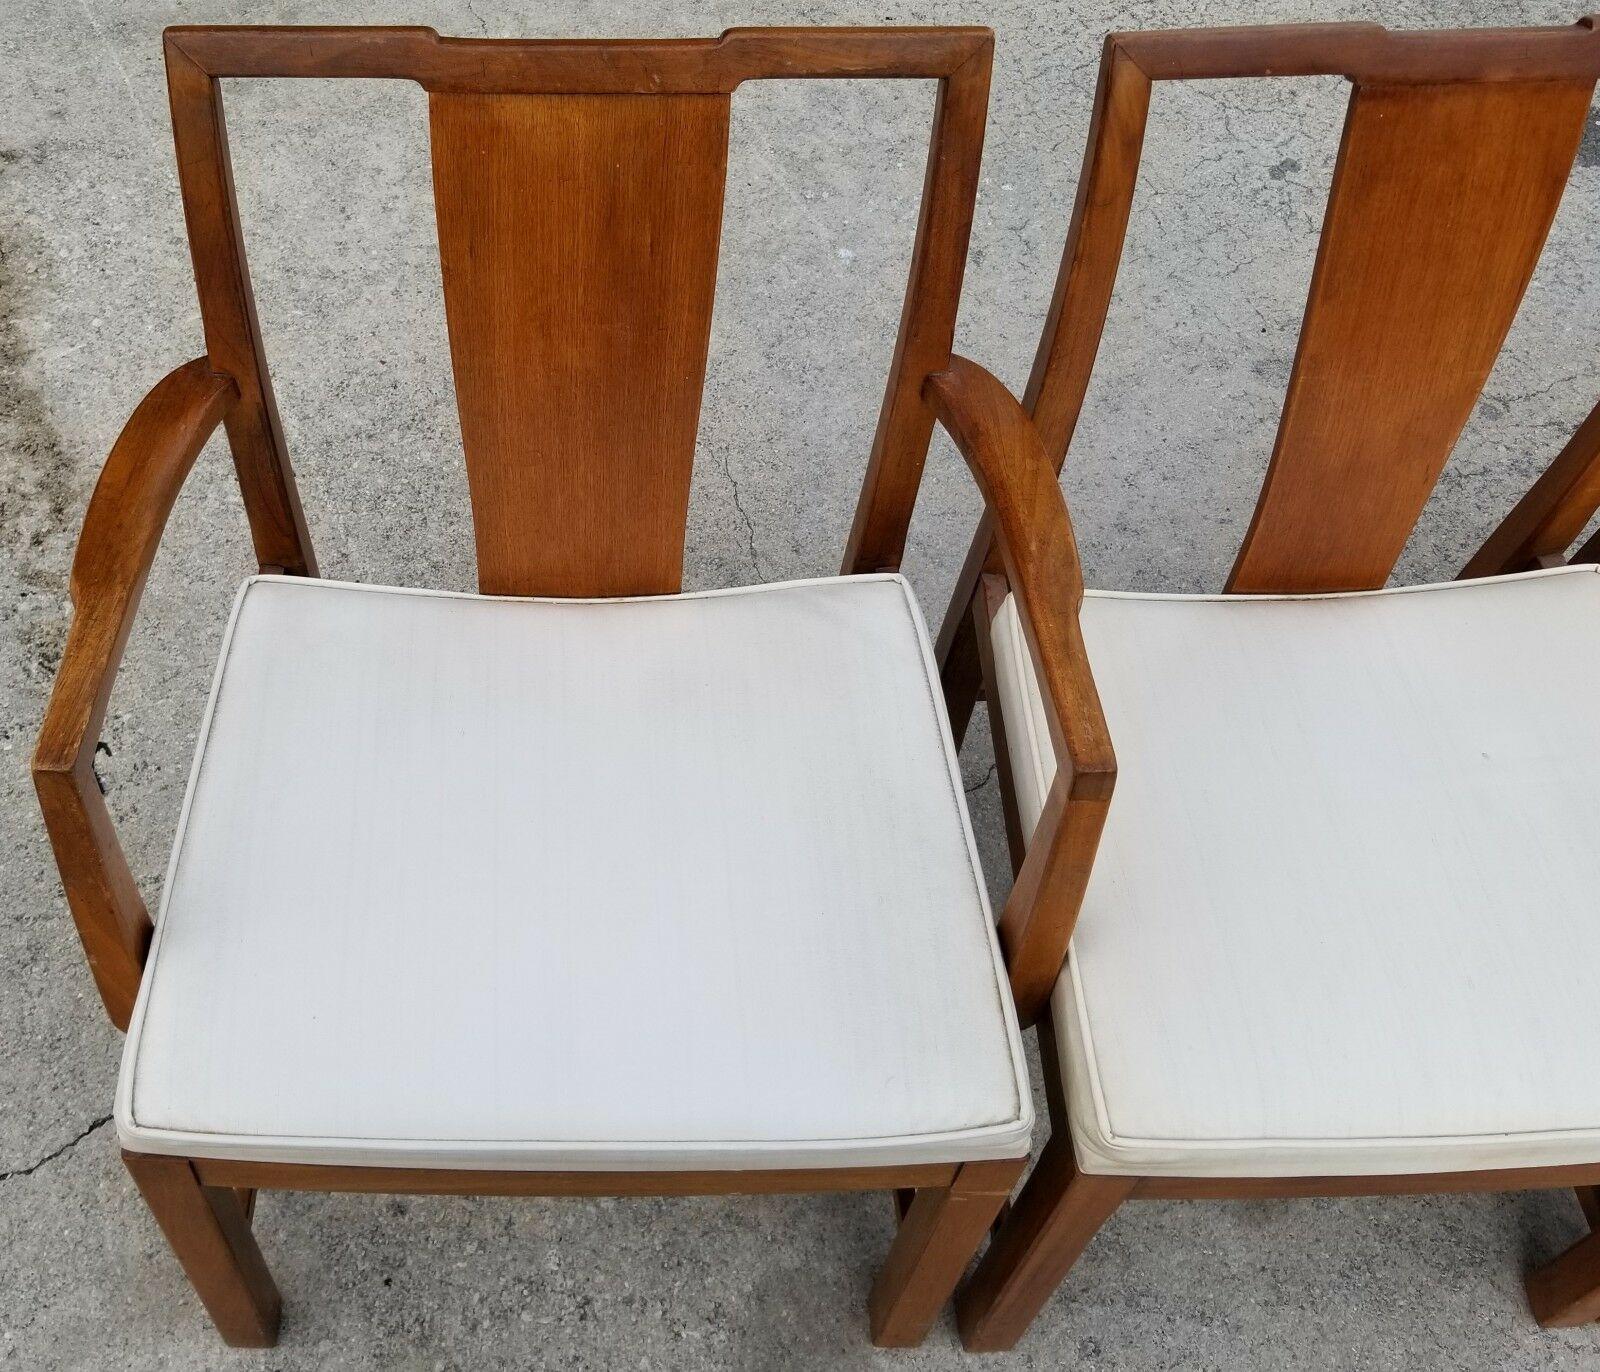 Mid-Century Modern '4' Dining Chairs Attributed to Michael Taylor for Baker Furniture